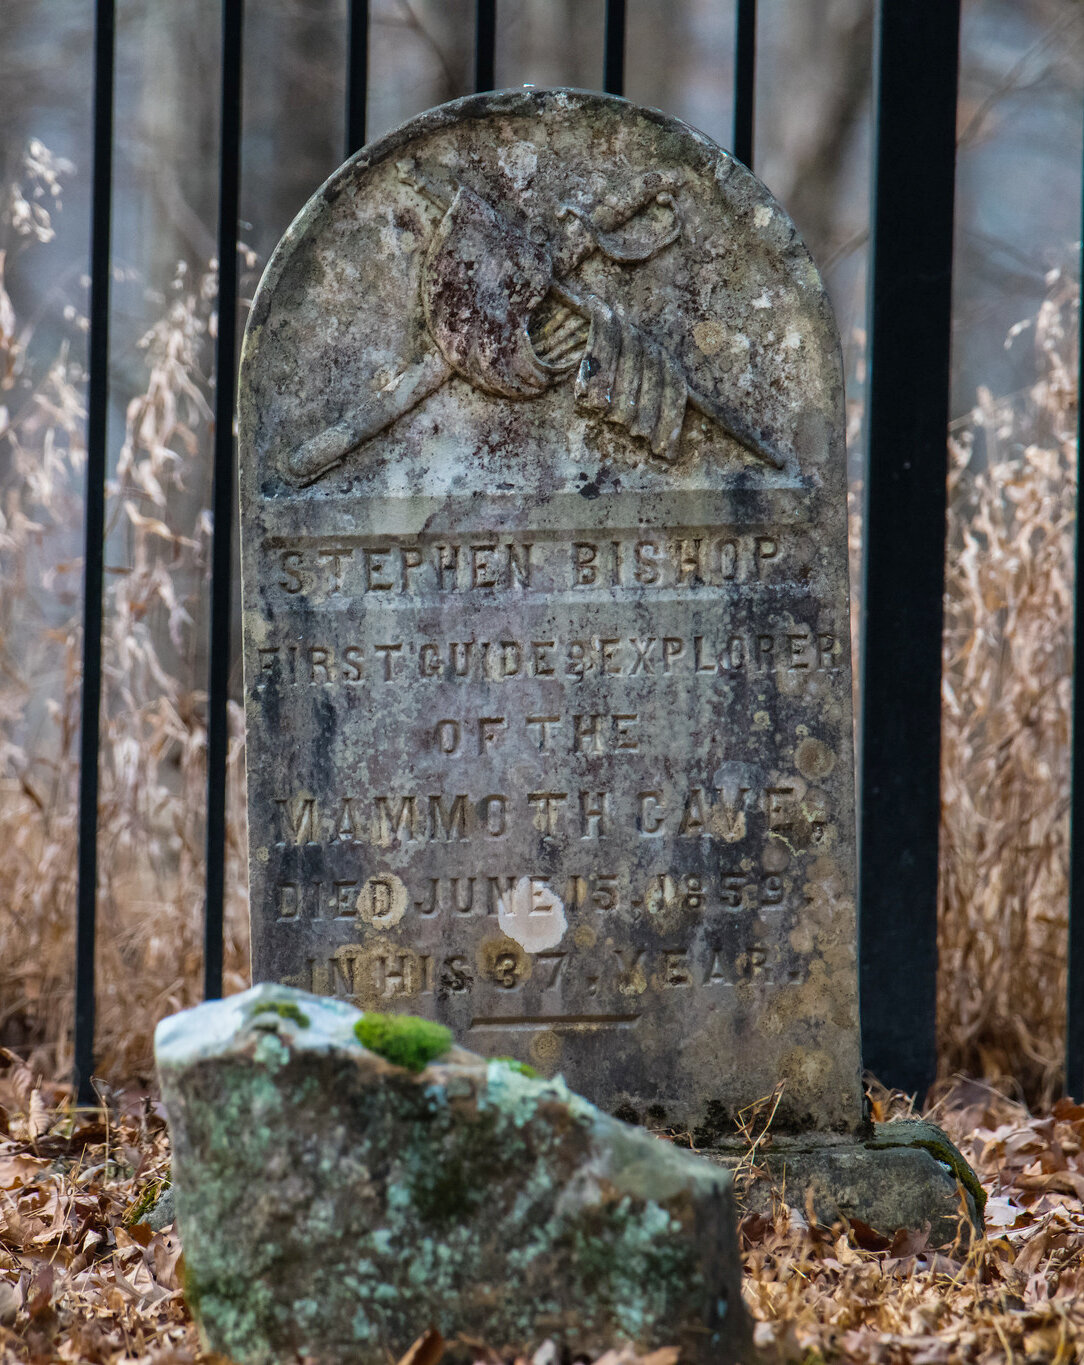  Headstone purchased for Stephen Bishop by millionaire James Mellon. Photo courtesy of Don Sniegowski |  flickr  